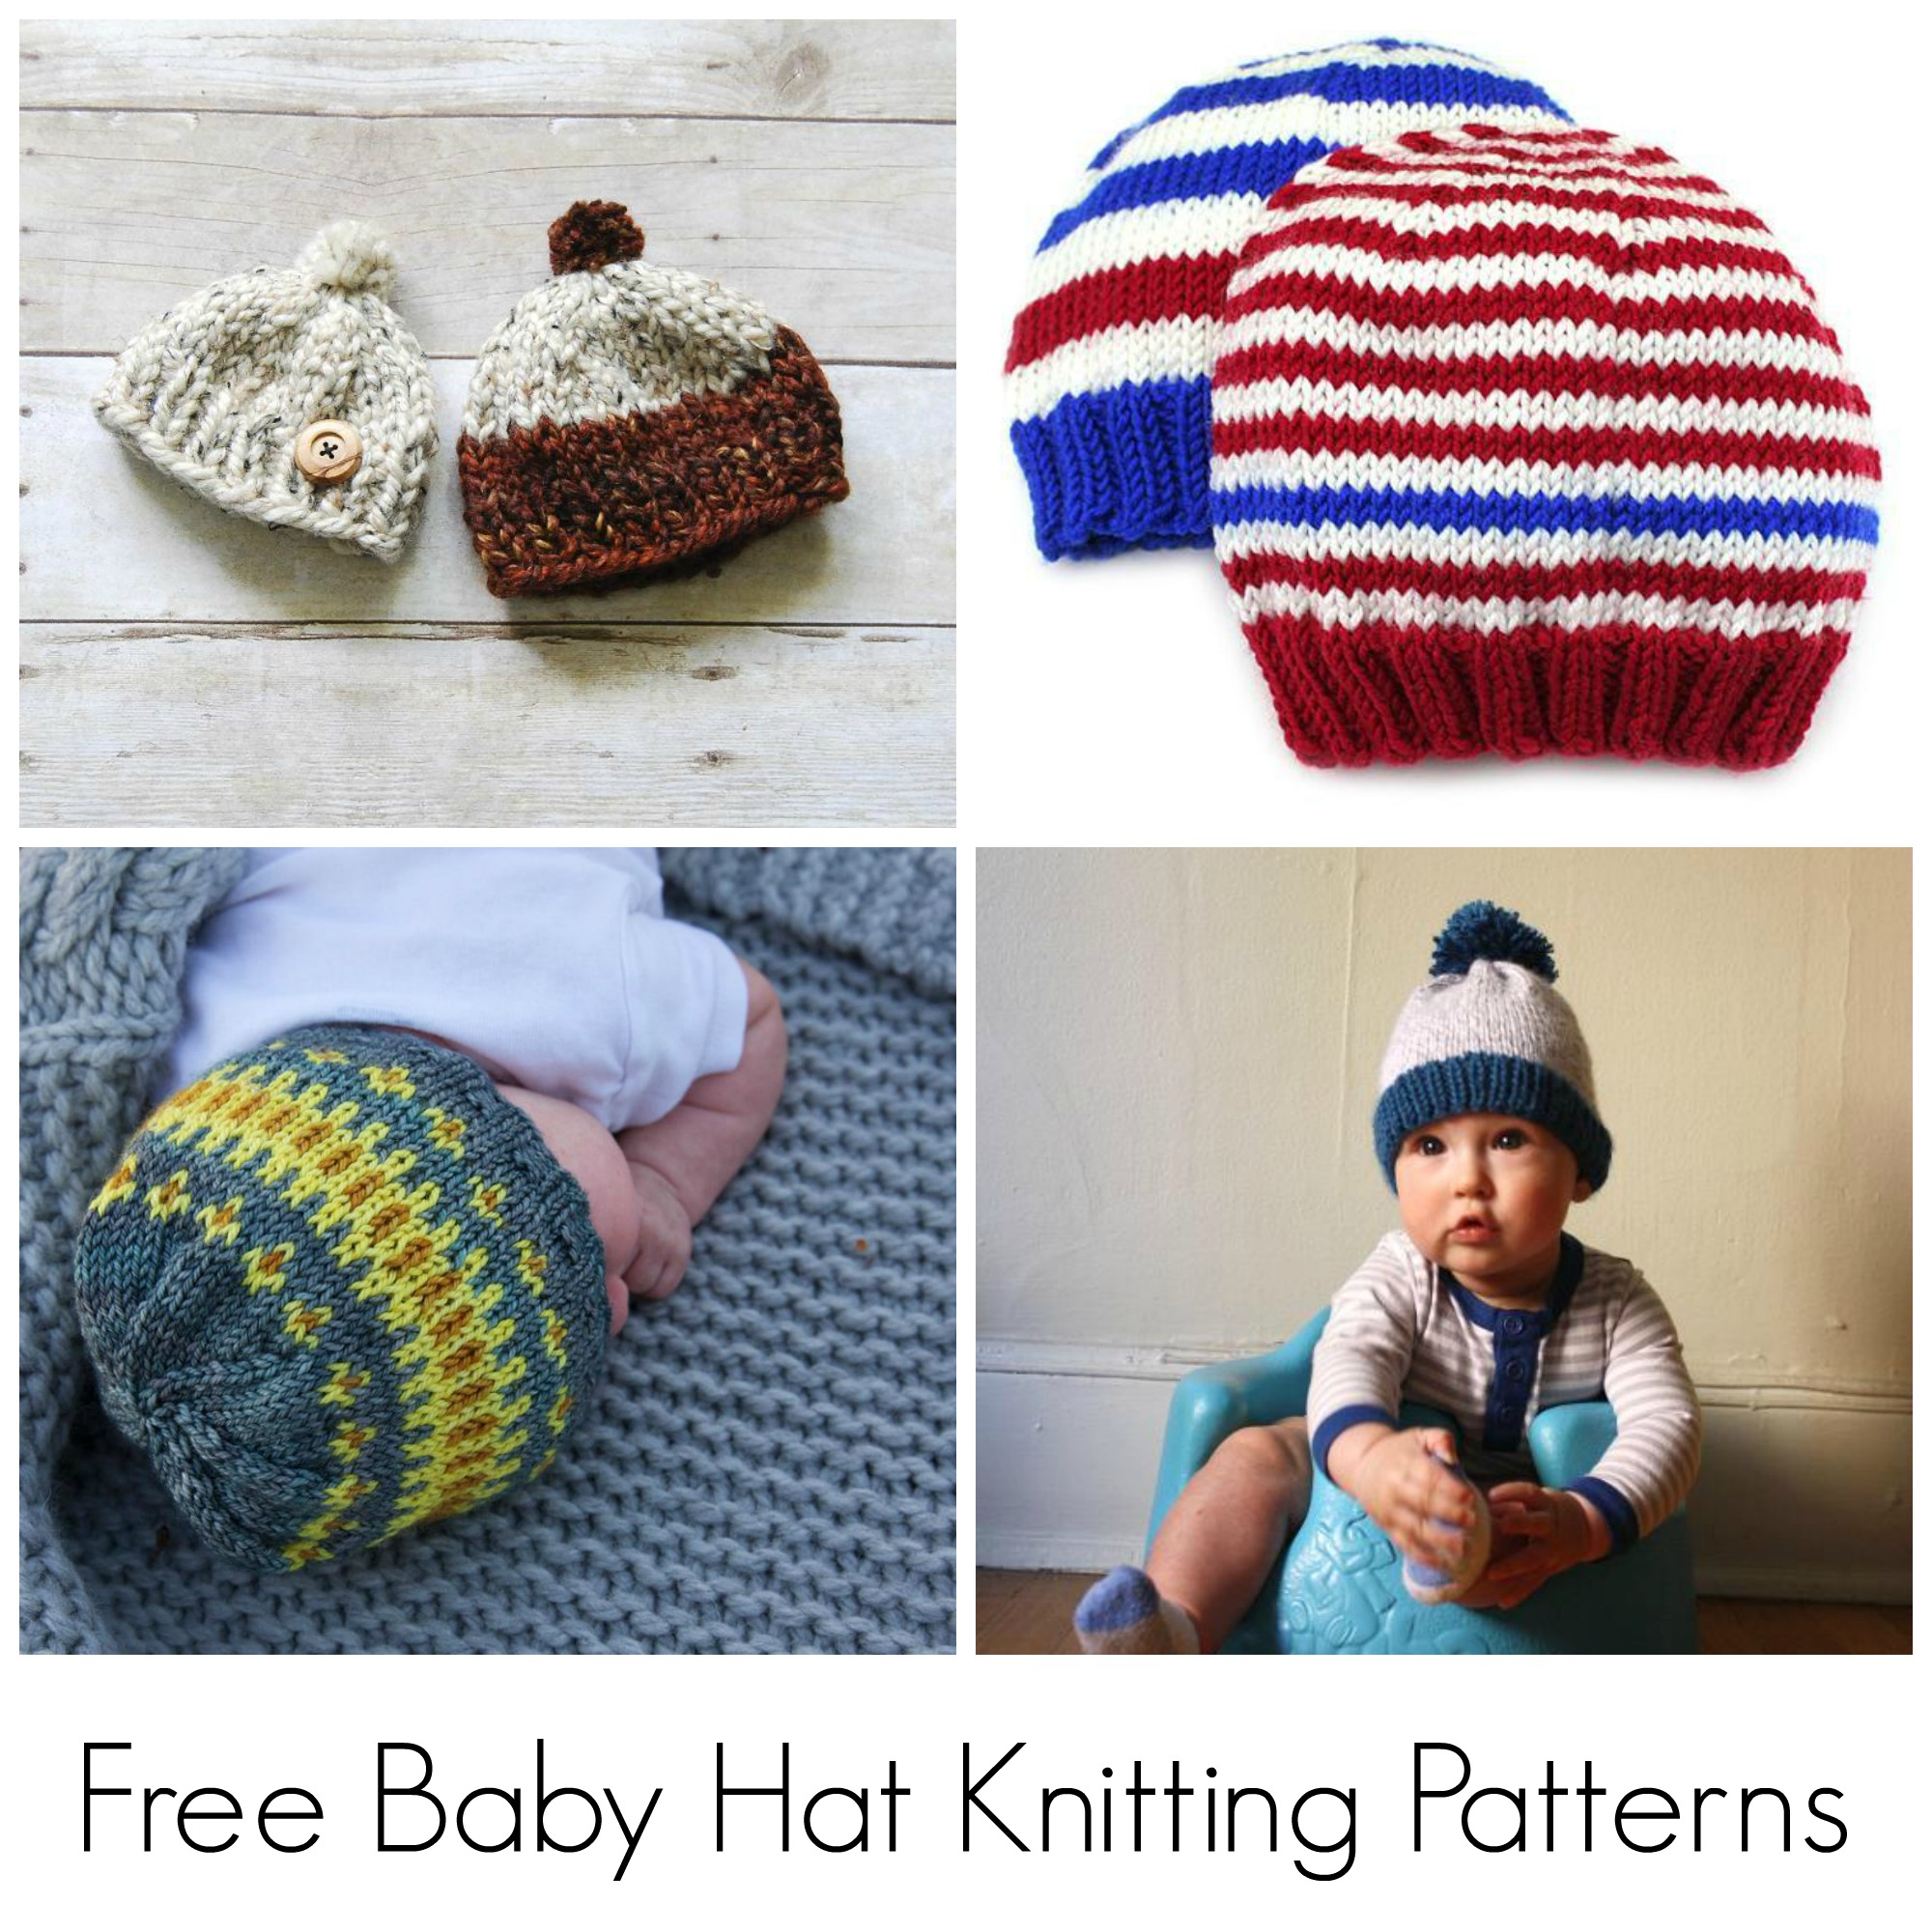 Hats To Knit Free Patterns 10 Free Knitting Patterns For Ba Hats On Craftsy